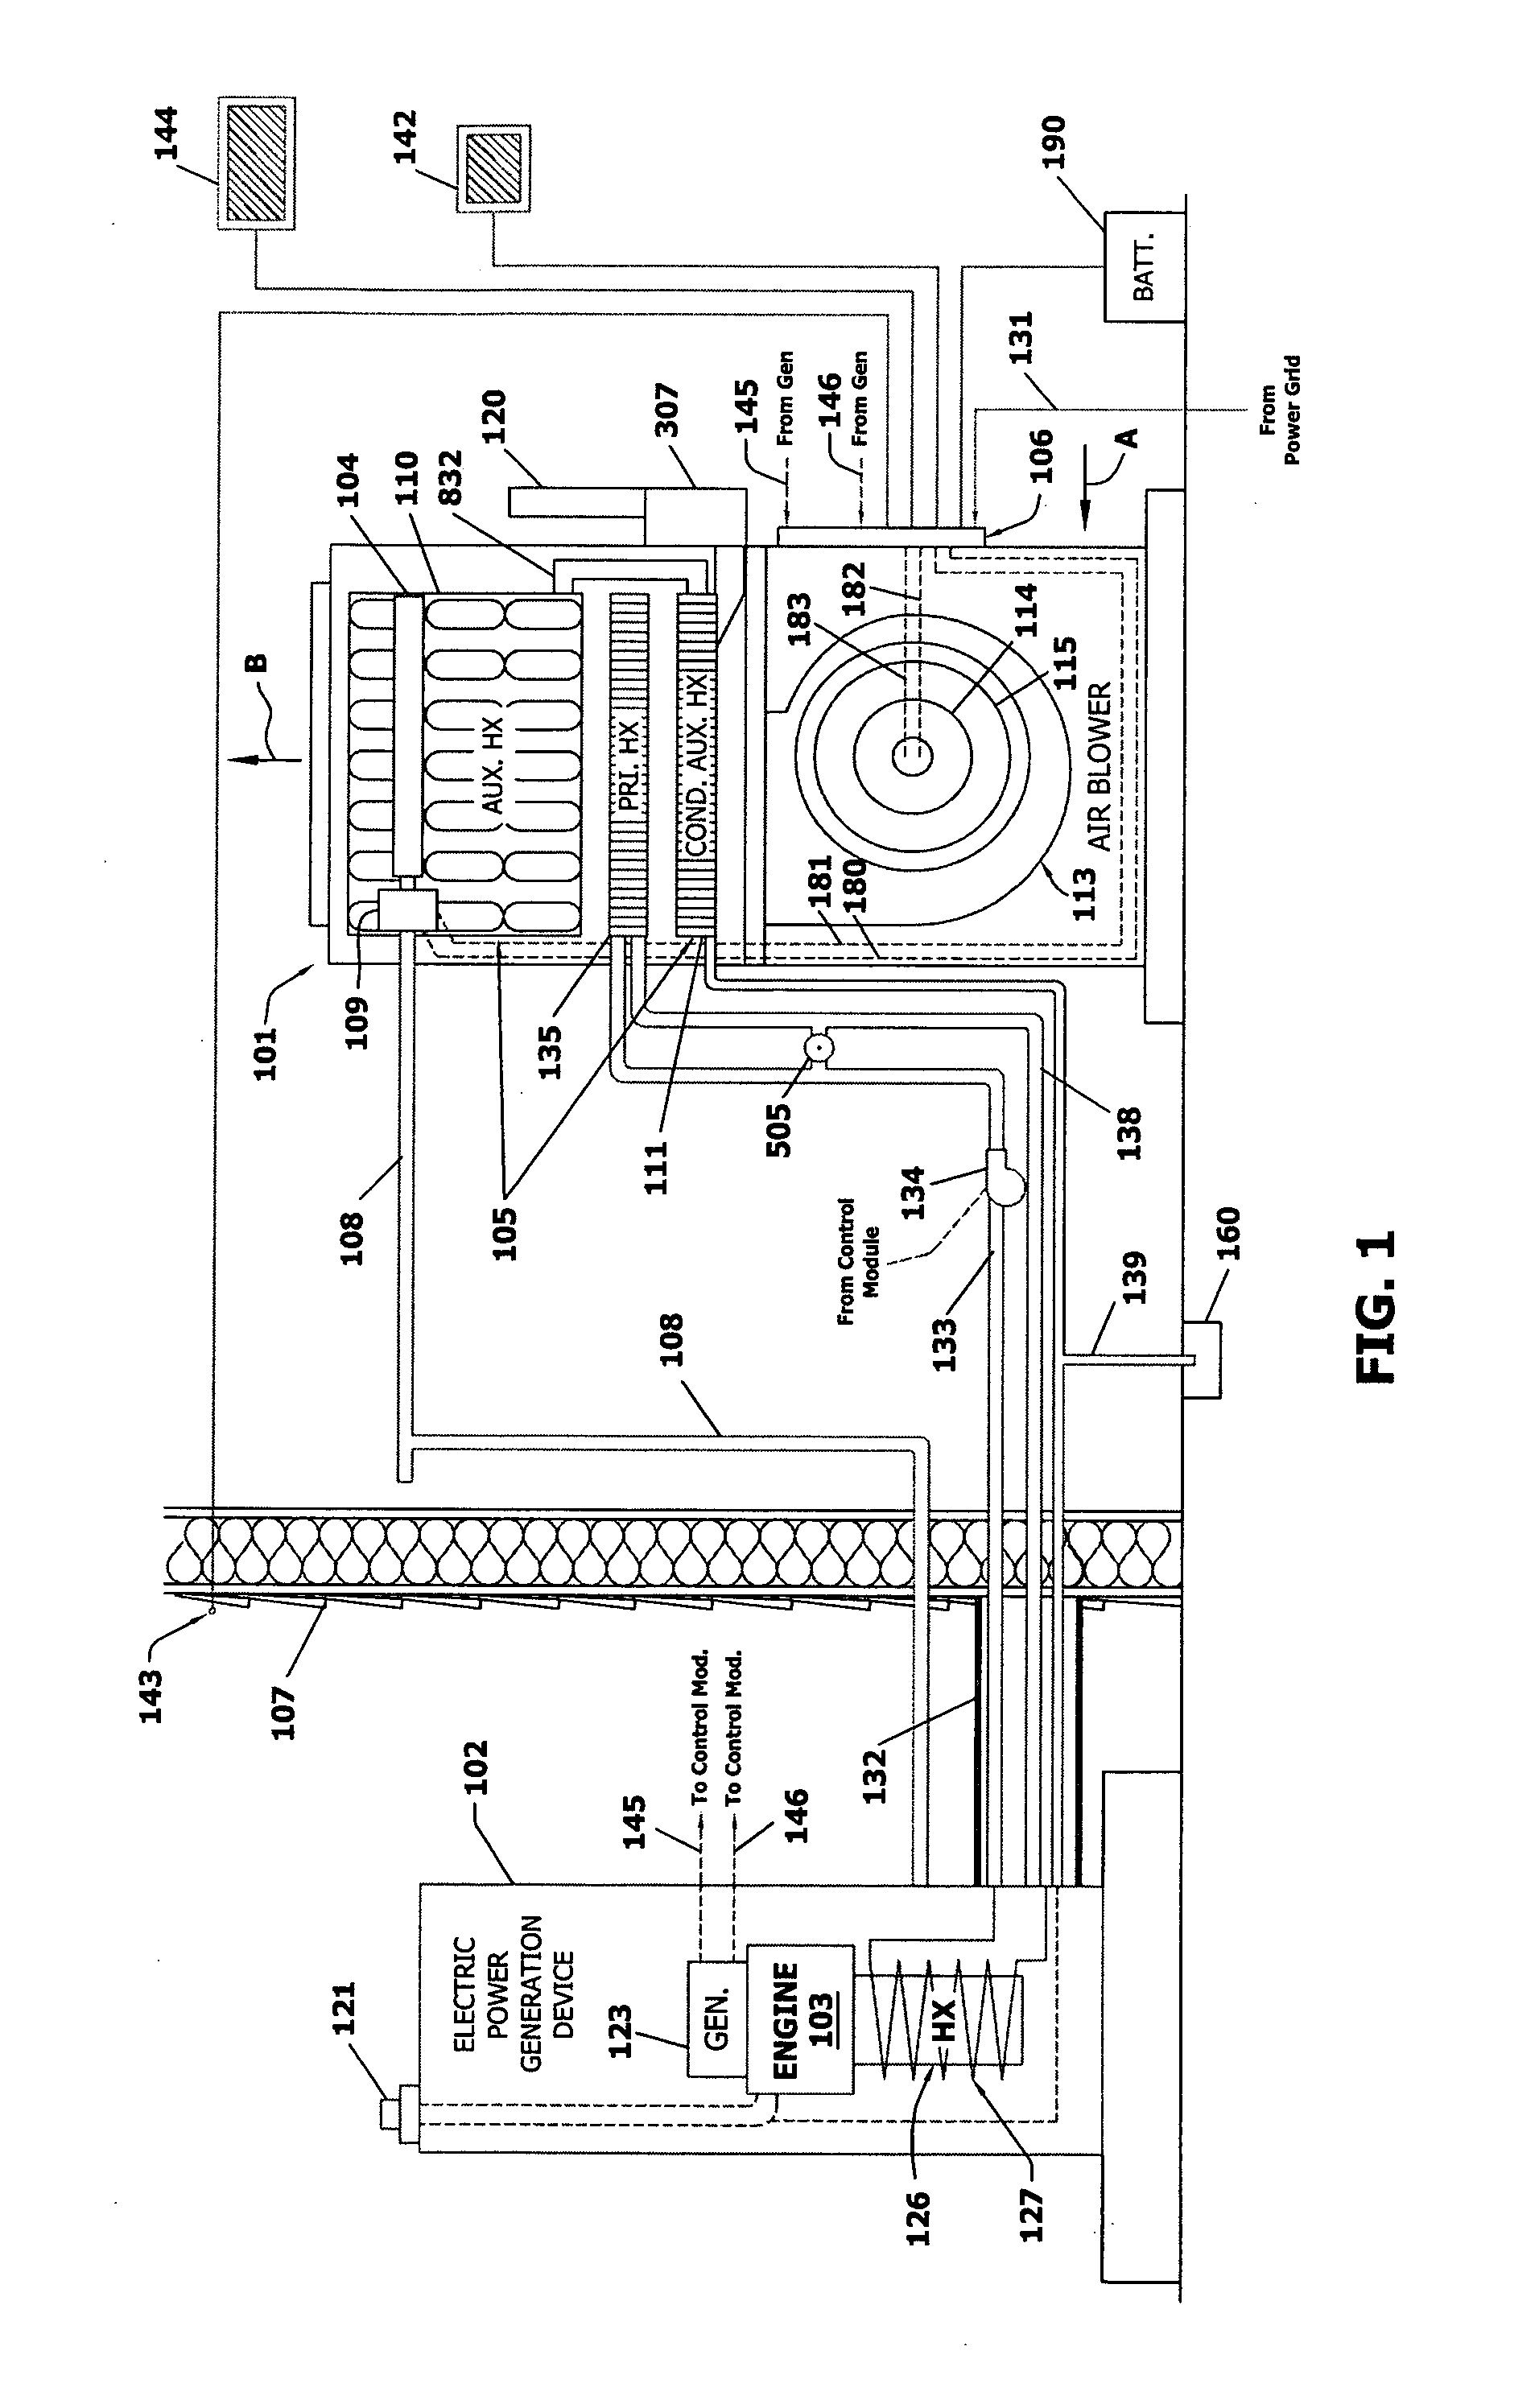 System and method for warm air space heating with electrical power generation